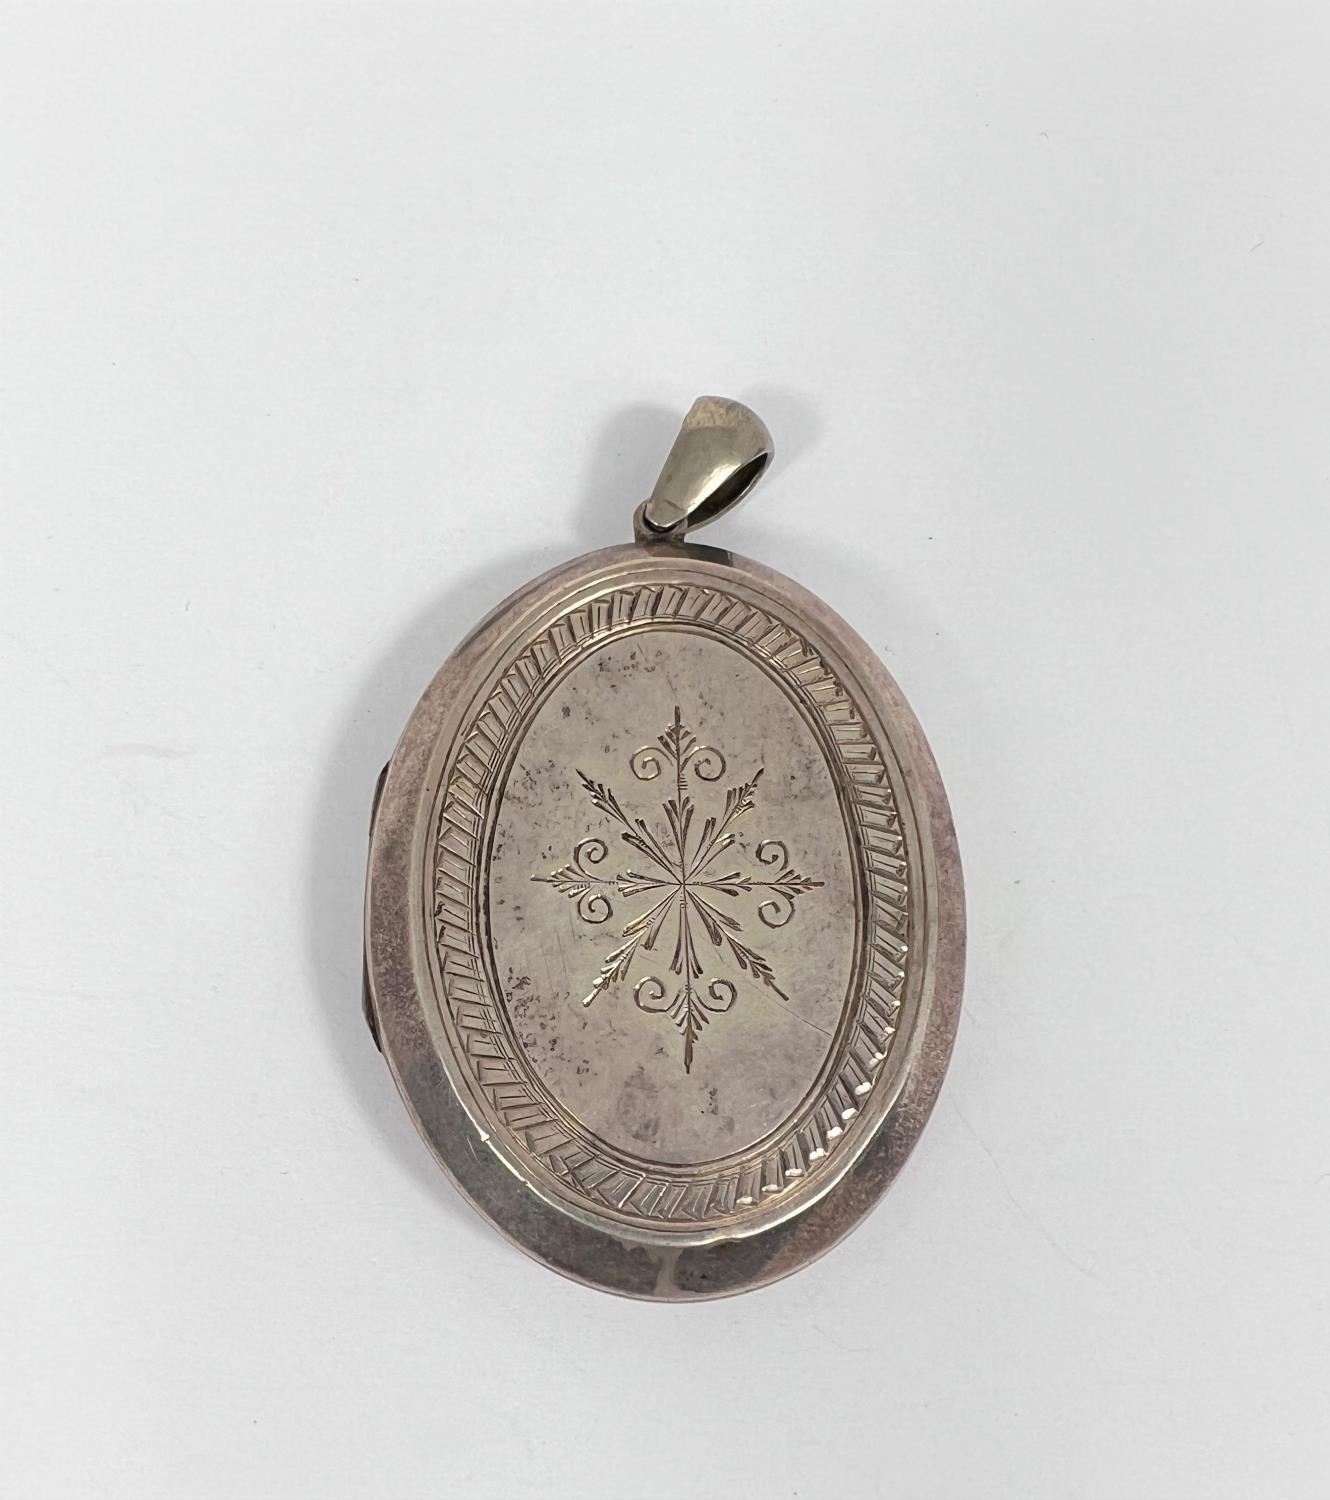 A late 19th century locket with incised decoration to the front and back